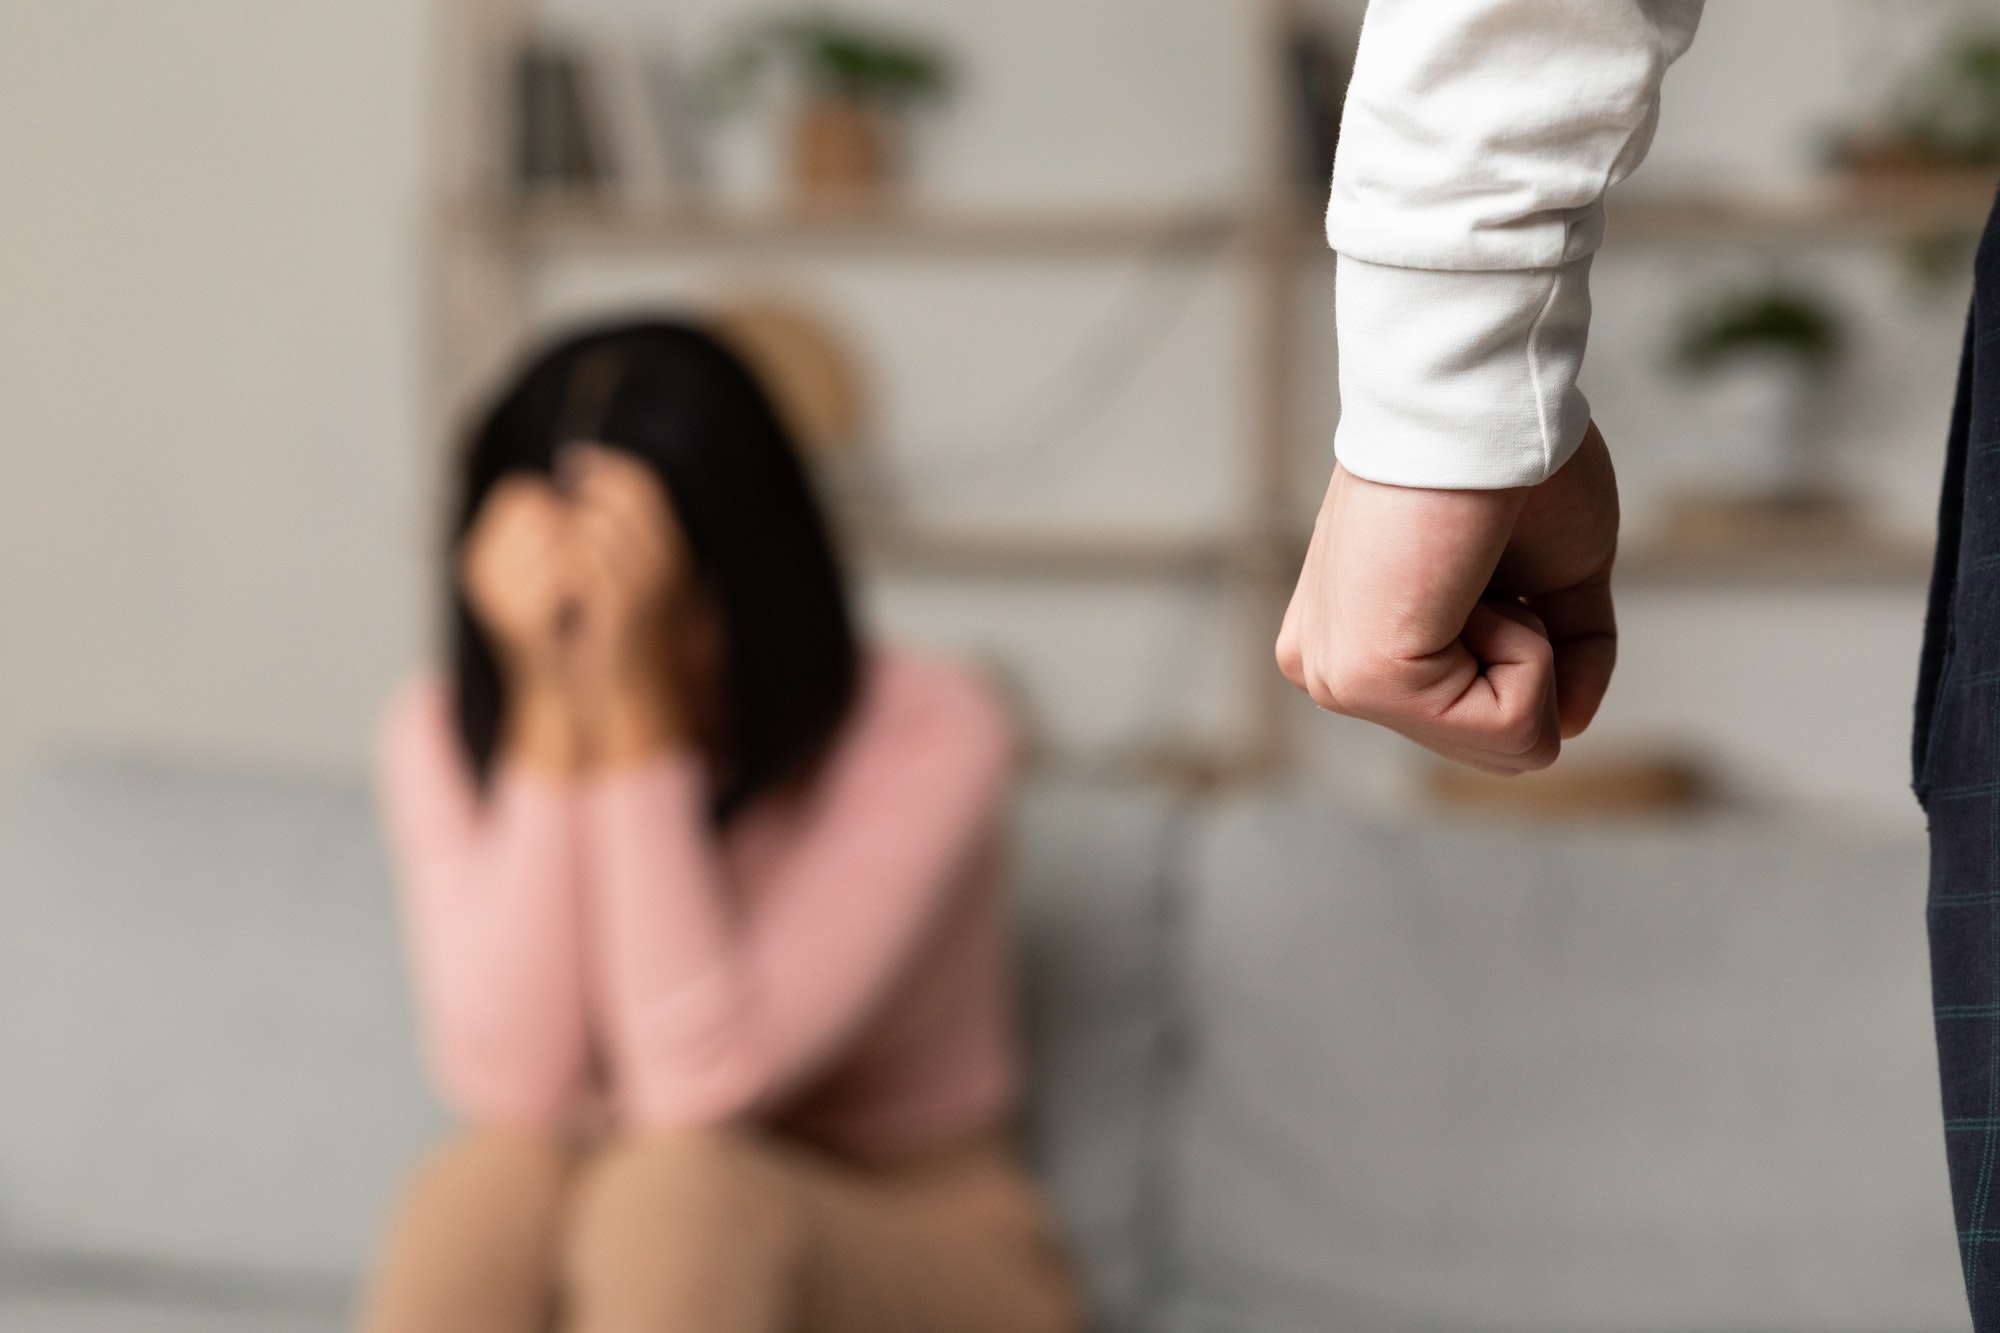 Domestic Abuse by controlling husband